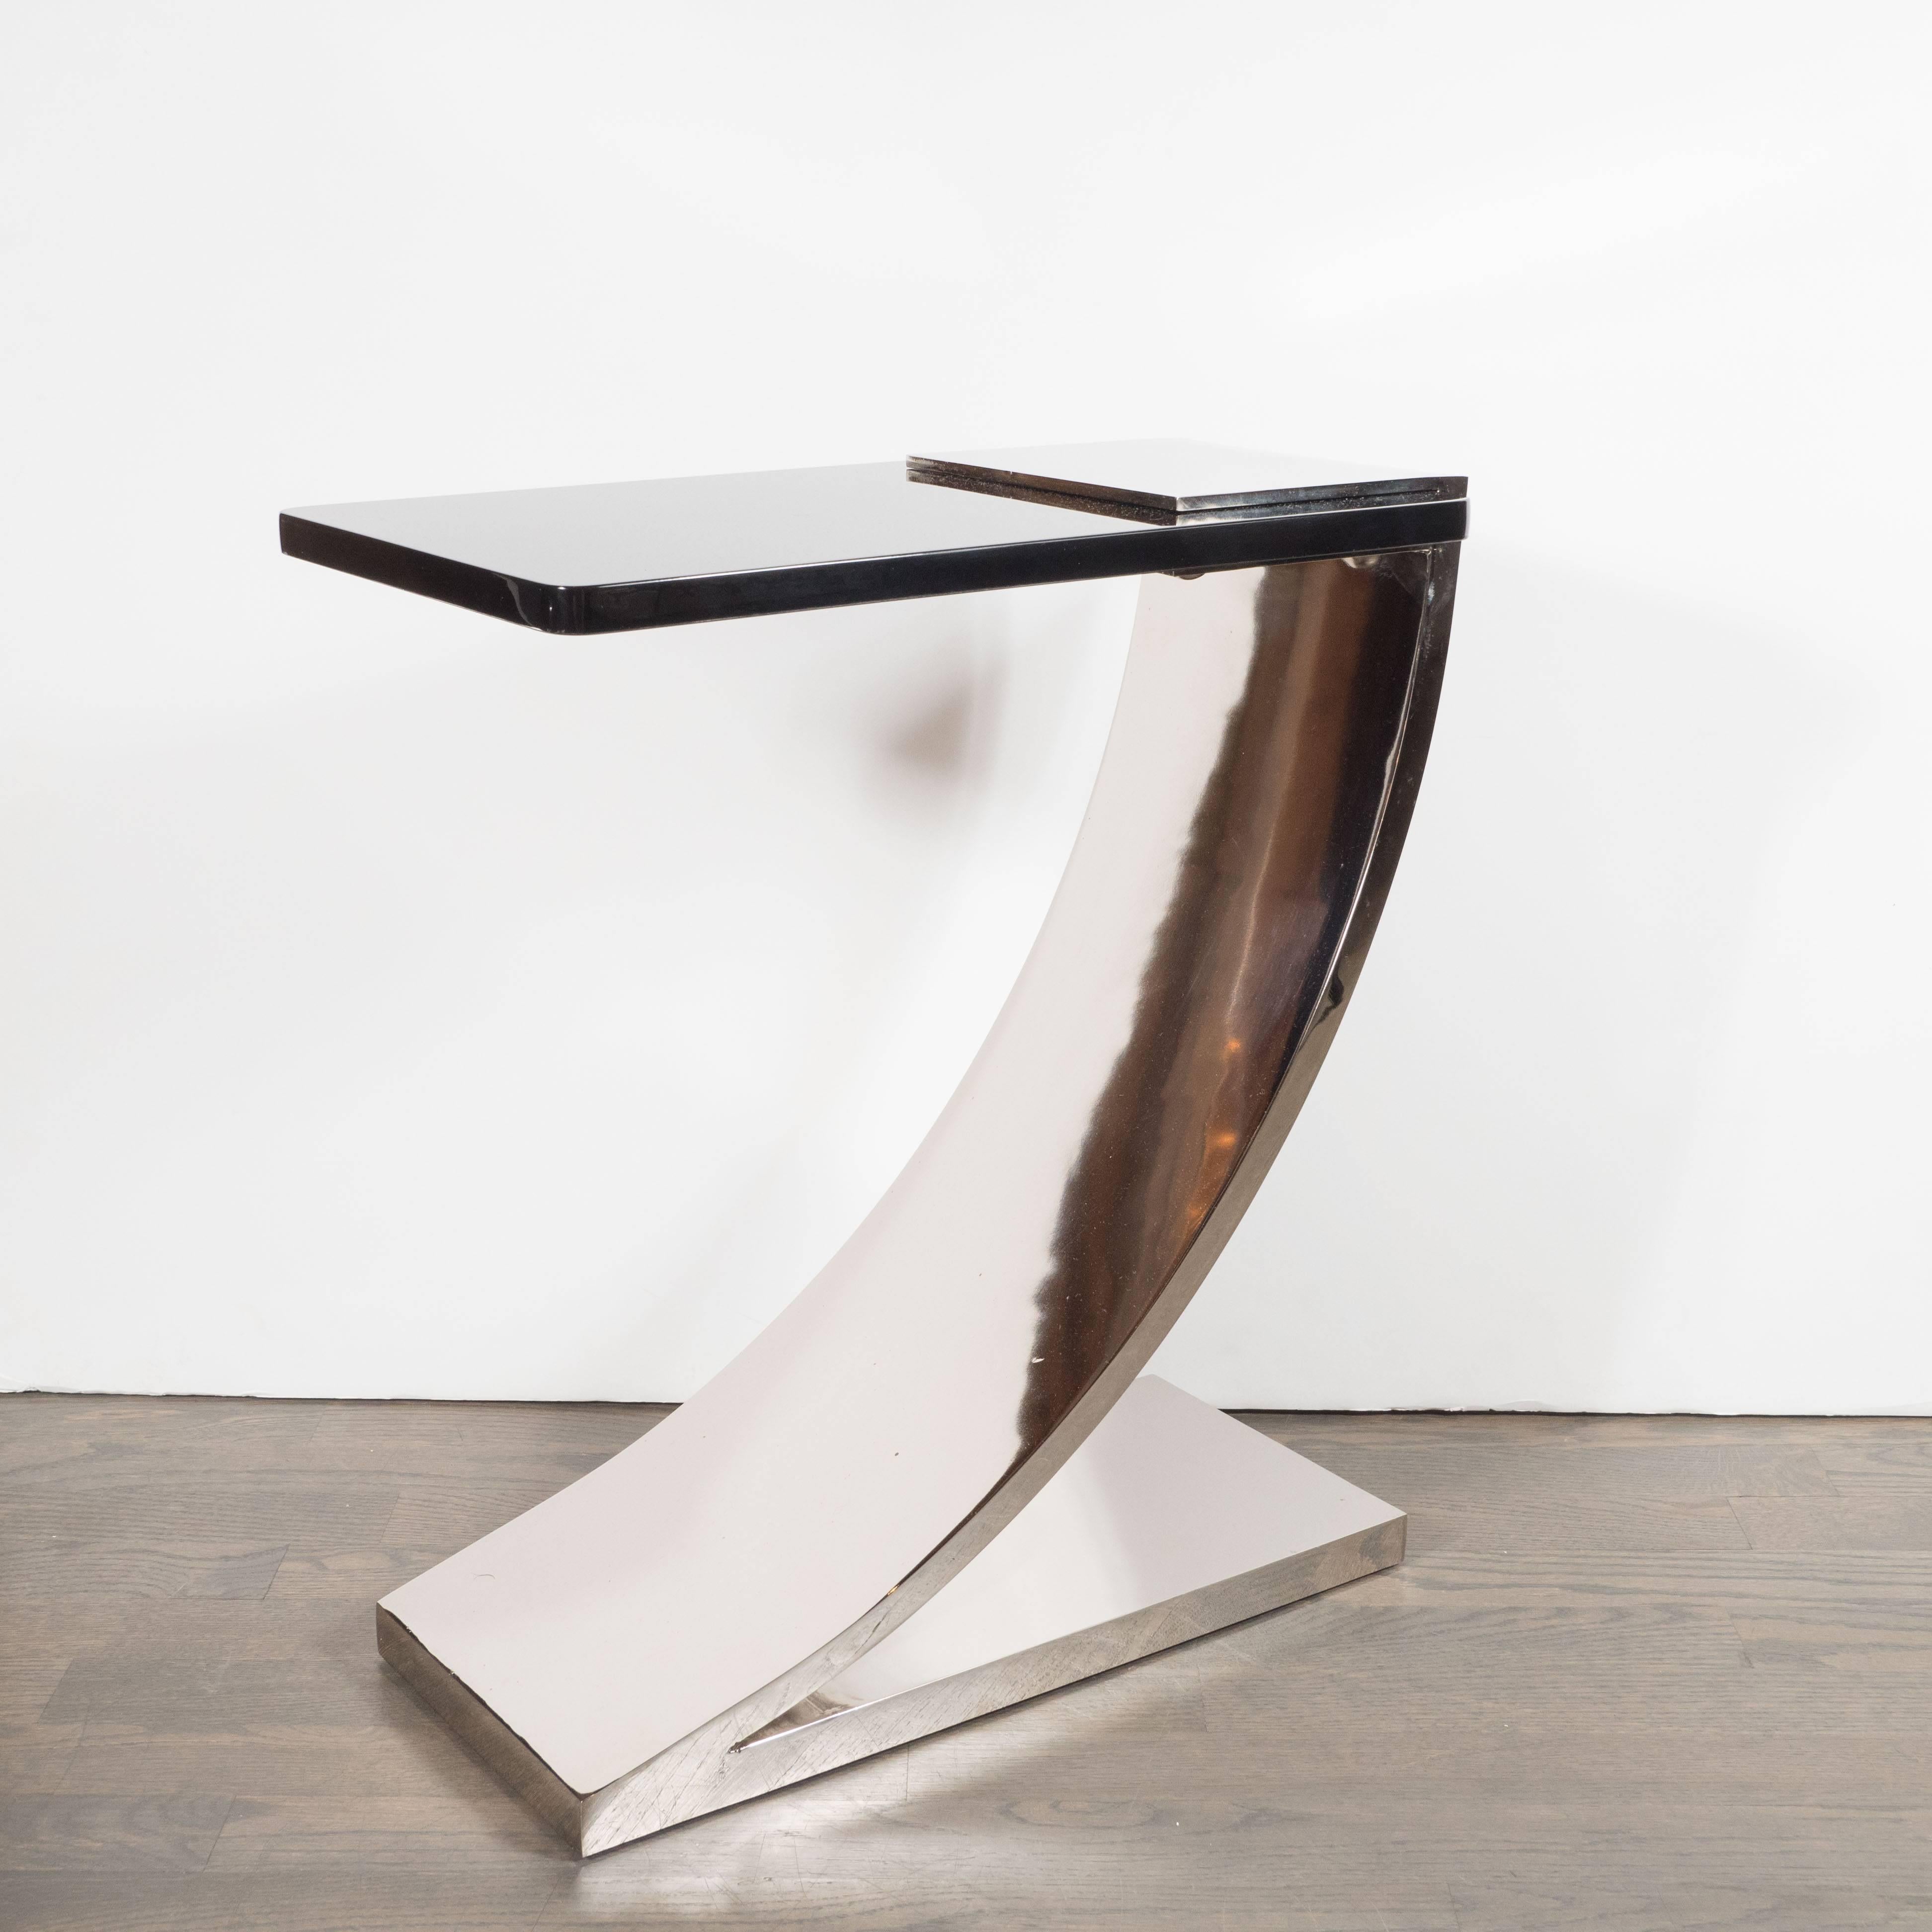 This modernist side or drinks table offers a 